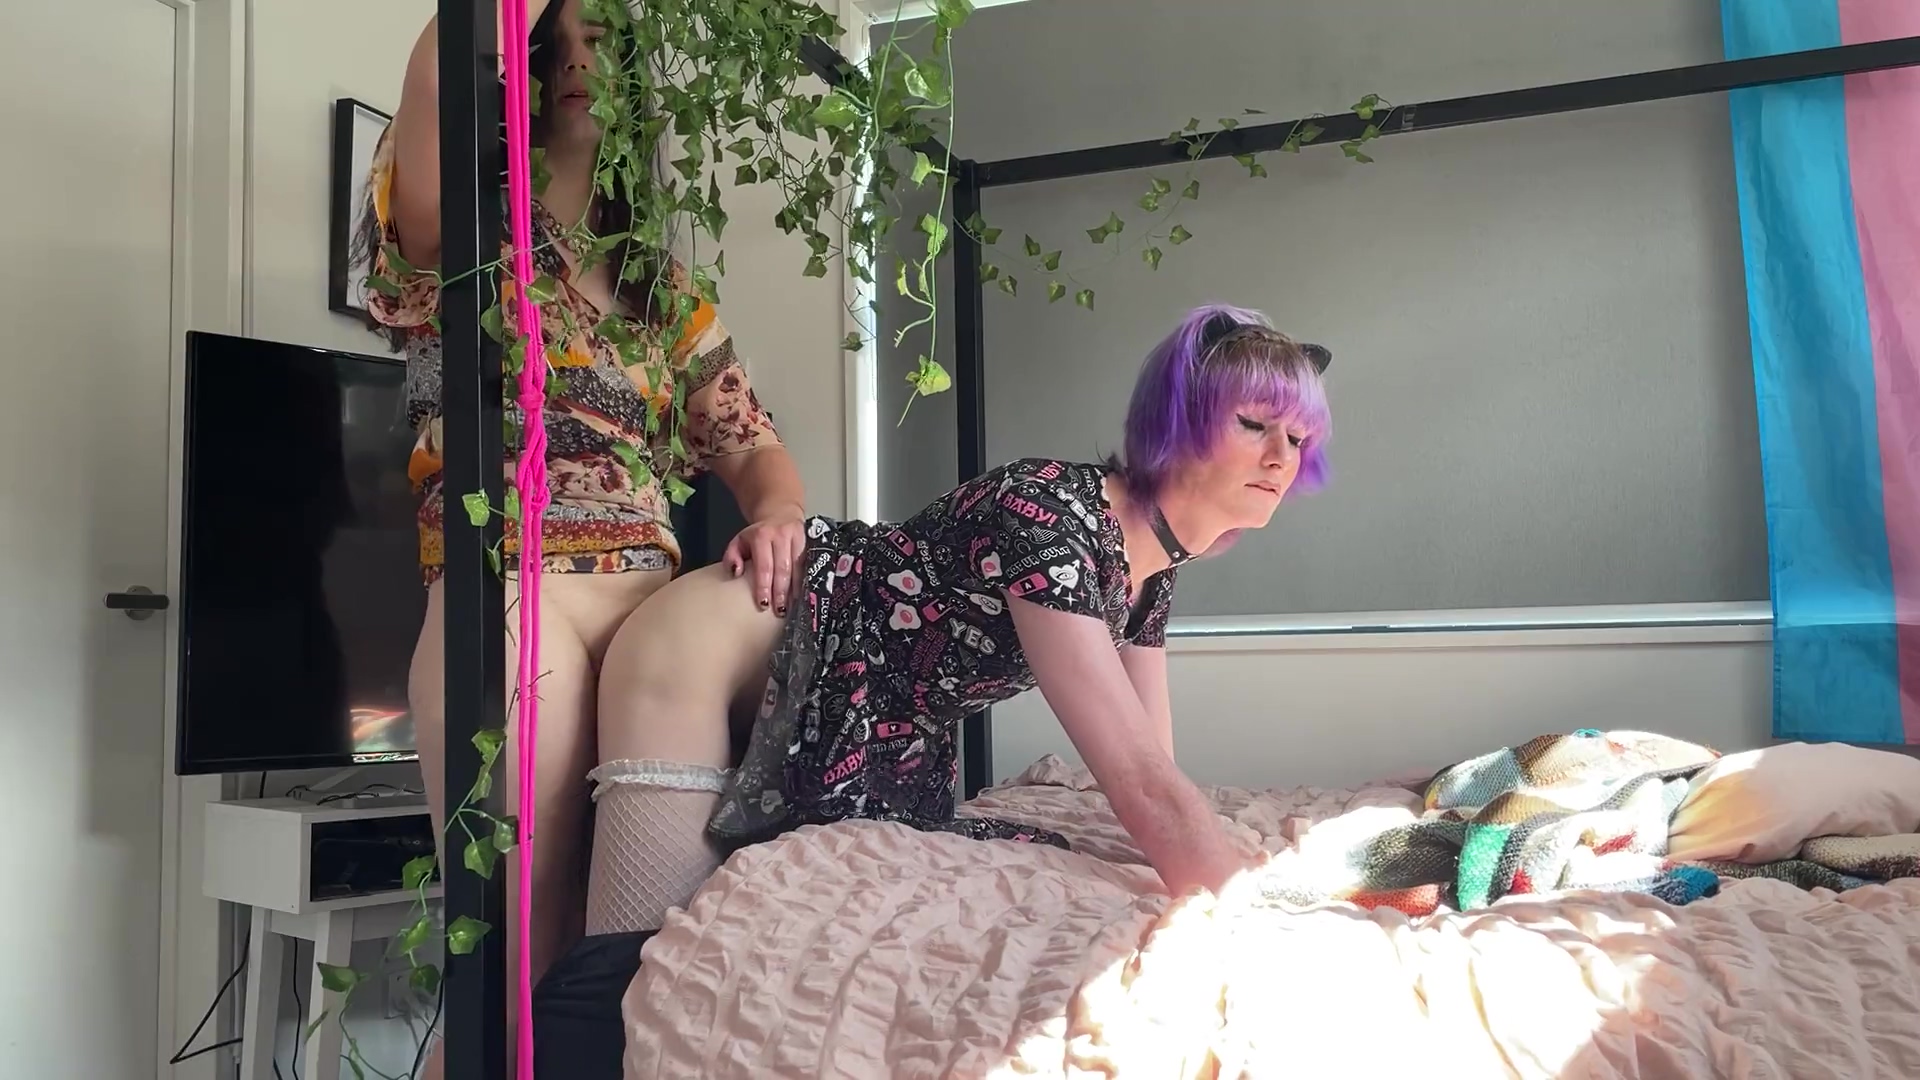 New Zealand Amateur Trans Lesbian Anal Ass Fucking Cassie Moans Shemale Porn Video - Shemale and Tranny Porn Tube picture